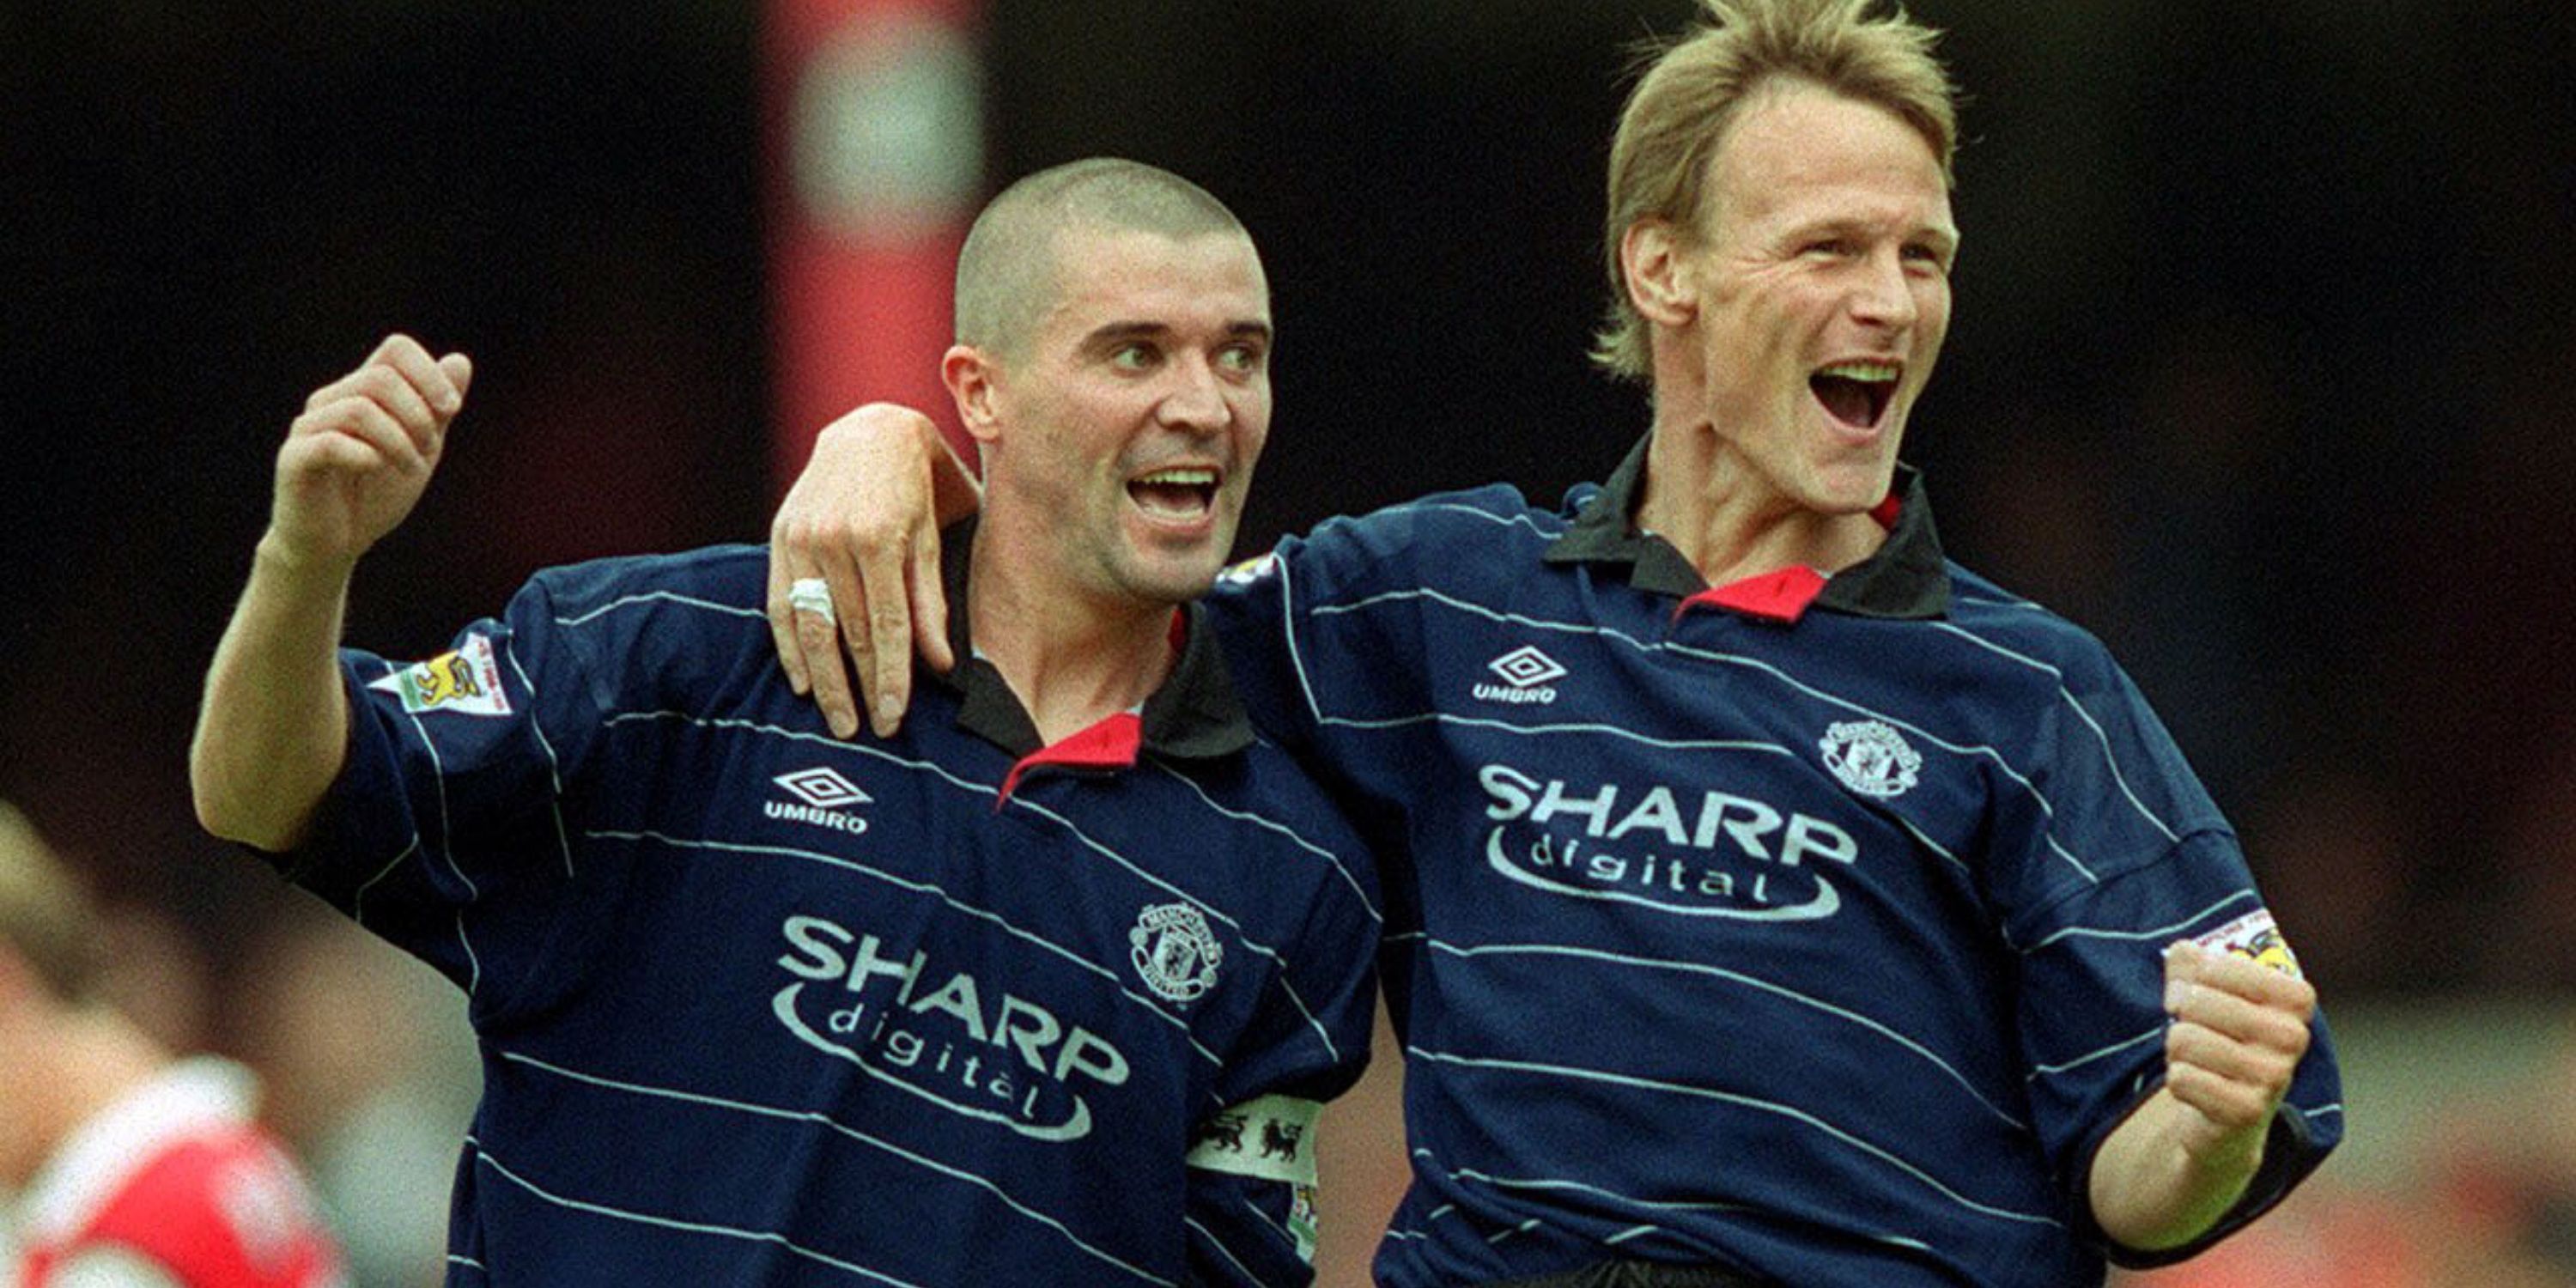 Man Utd: Roy Keane and Terry Sheringham's bust-up that stopped them speaking for 3.5 years